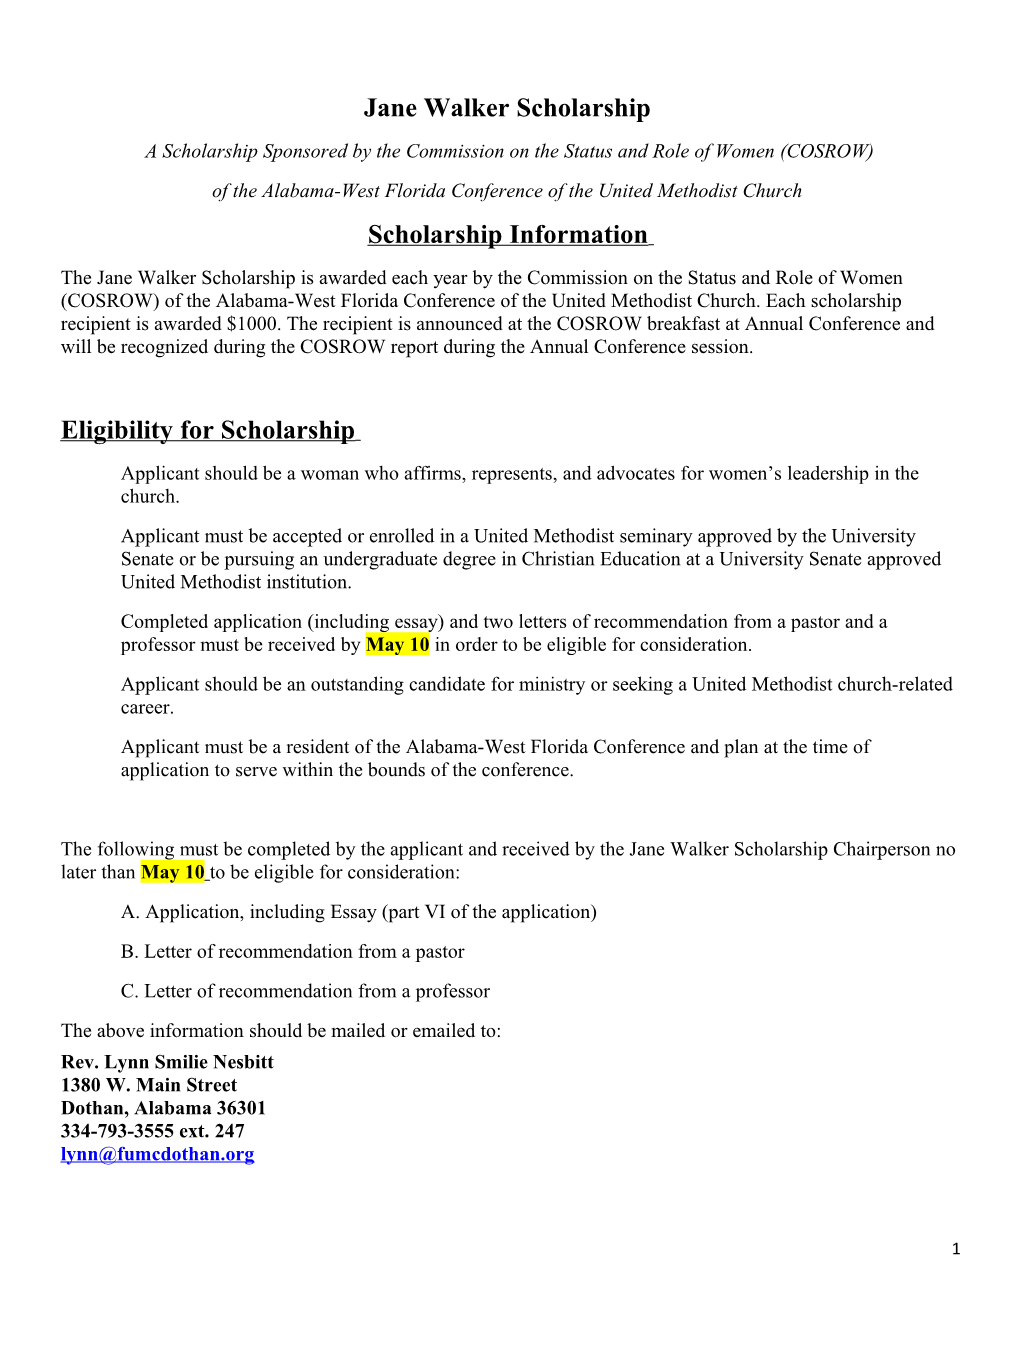 A Scholarship Sponsored by the Commission on the Status and Role of Women (COSROW)